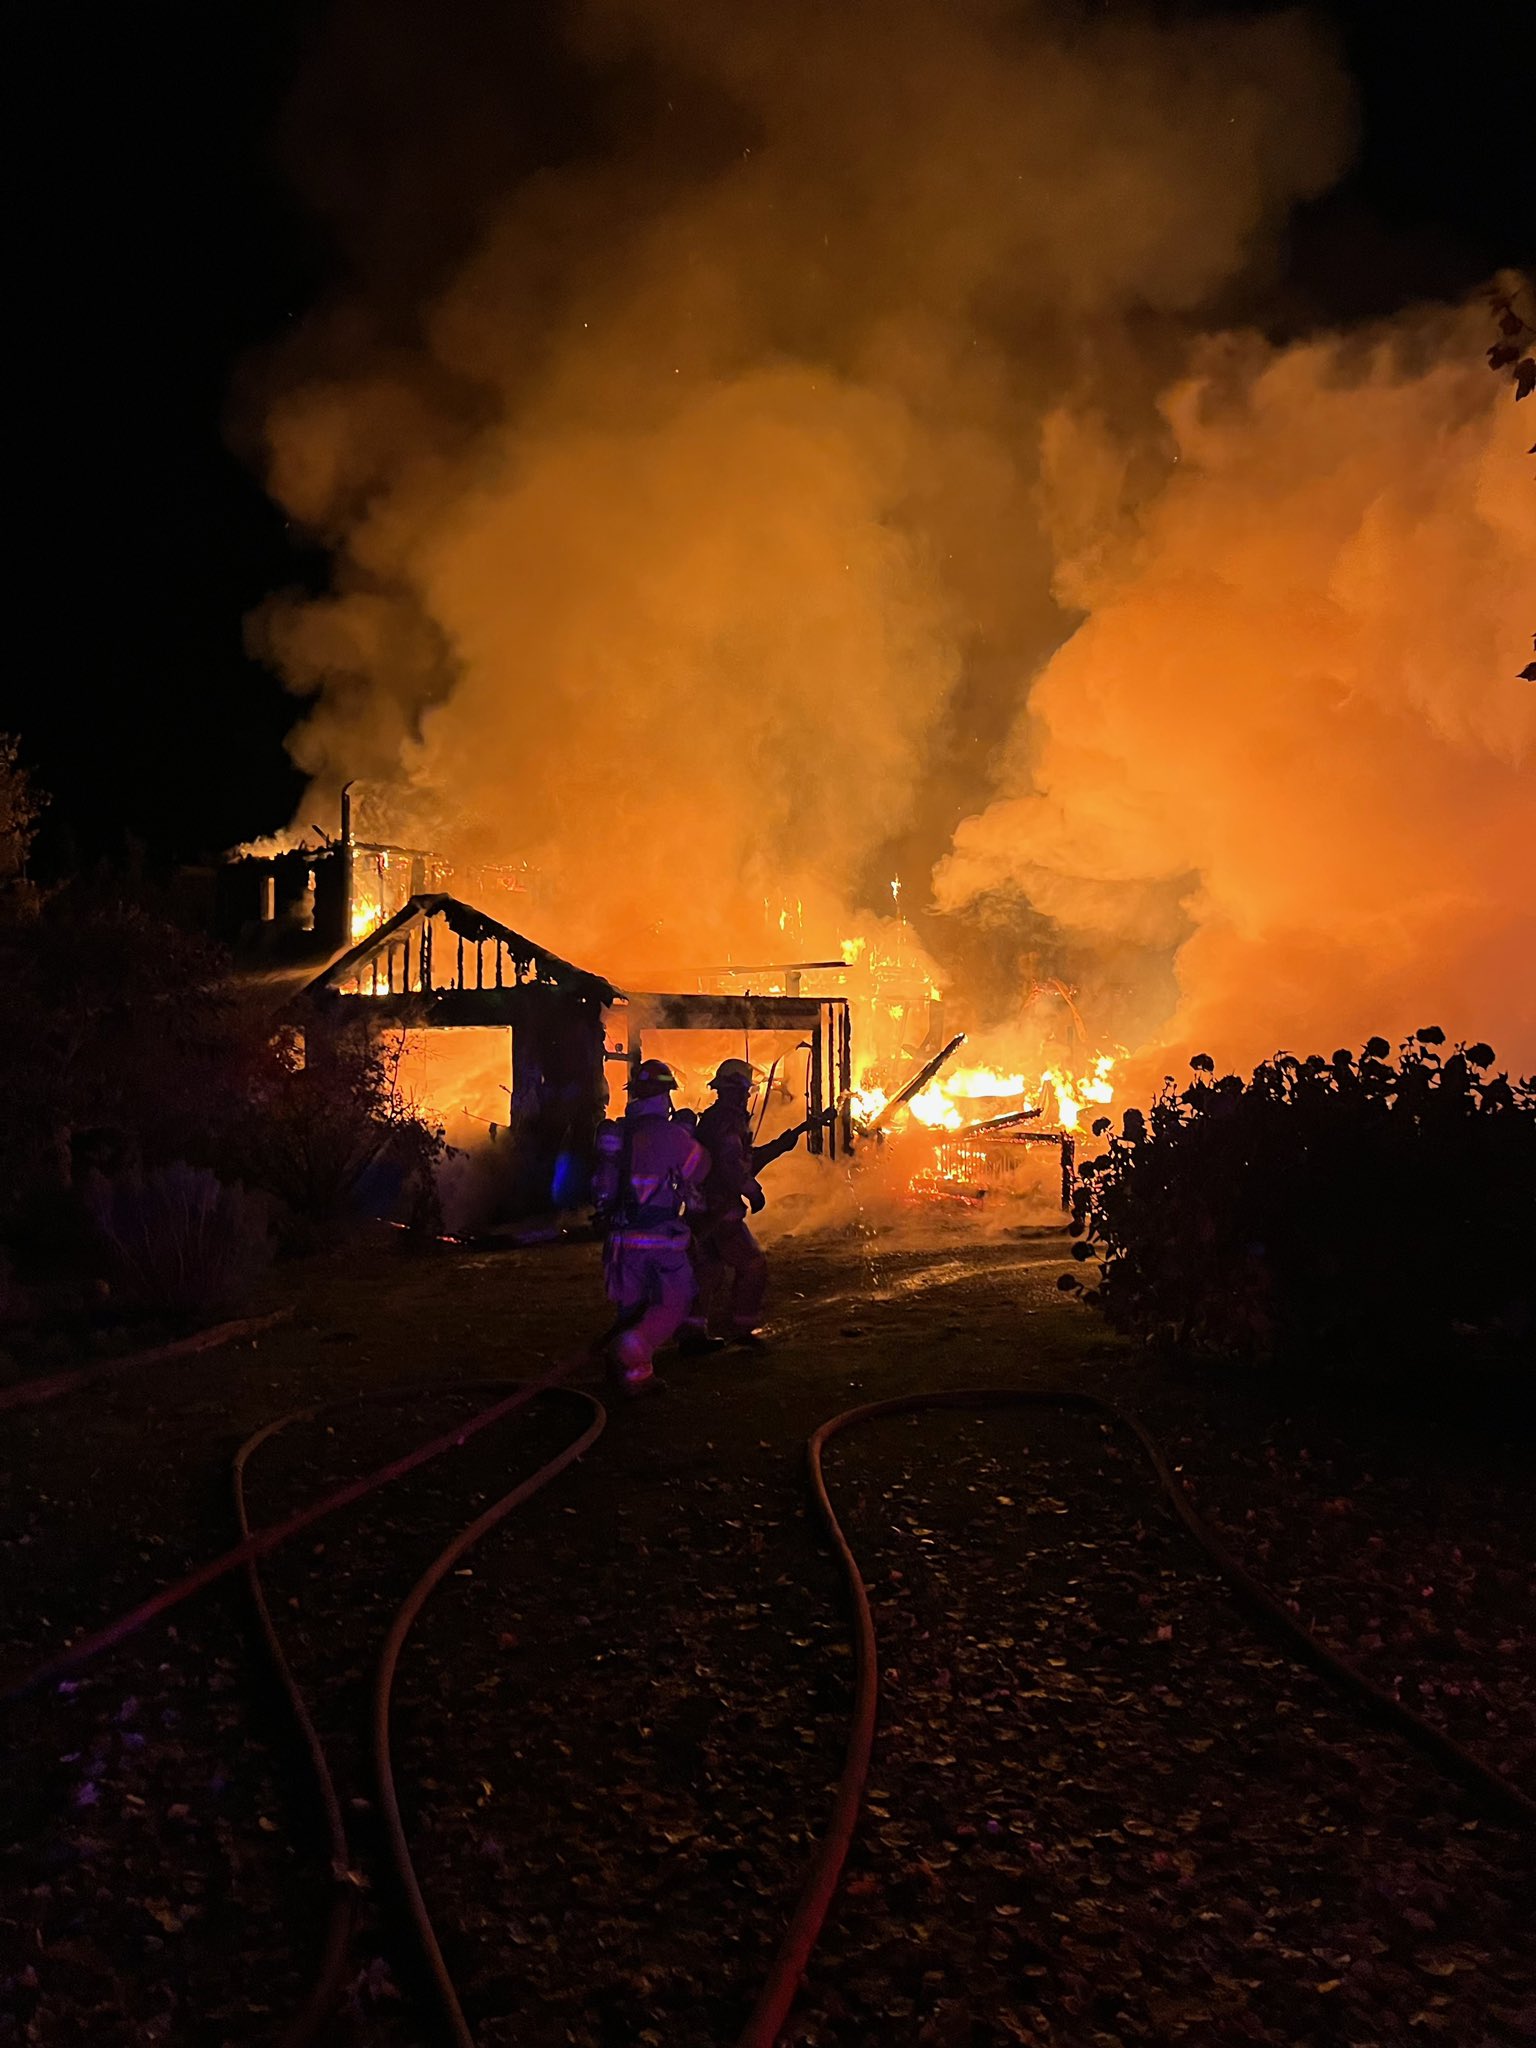 Portland Fire & Rescue on Twitter: "Last night PR&amp;R crews provided a mutual aid response to Sauvie Island FD to help protect structures that were threatened by a residential fire. A large